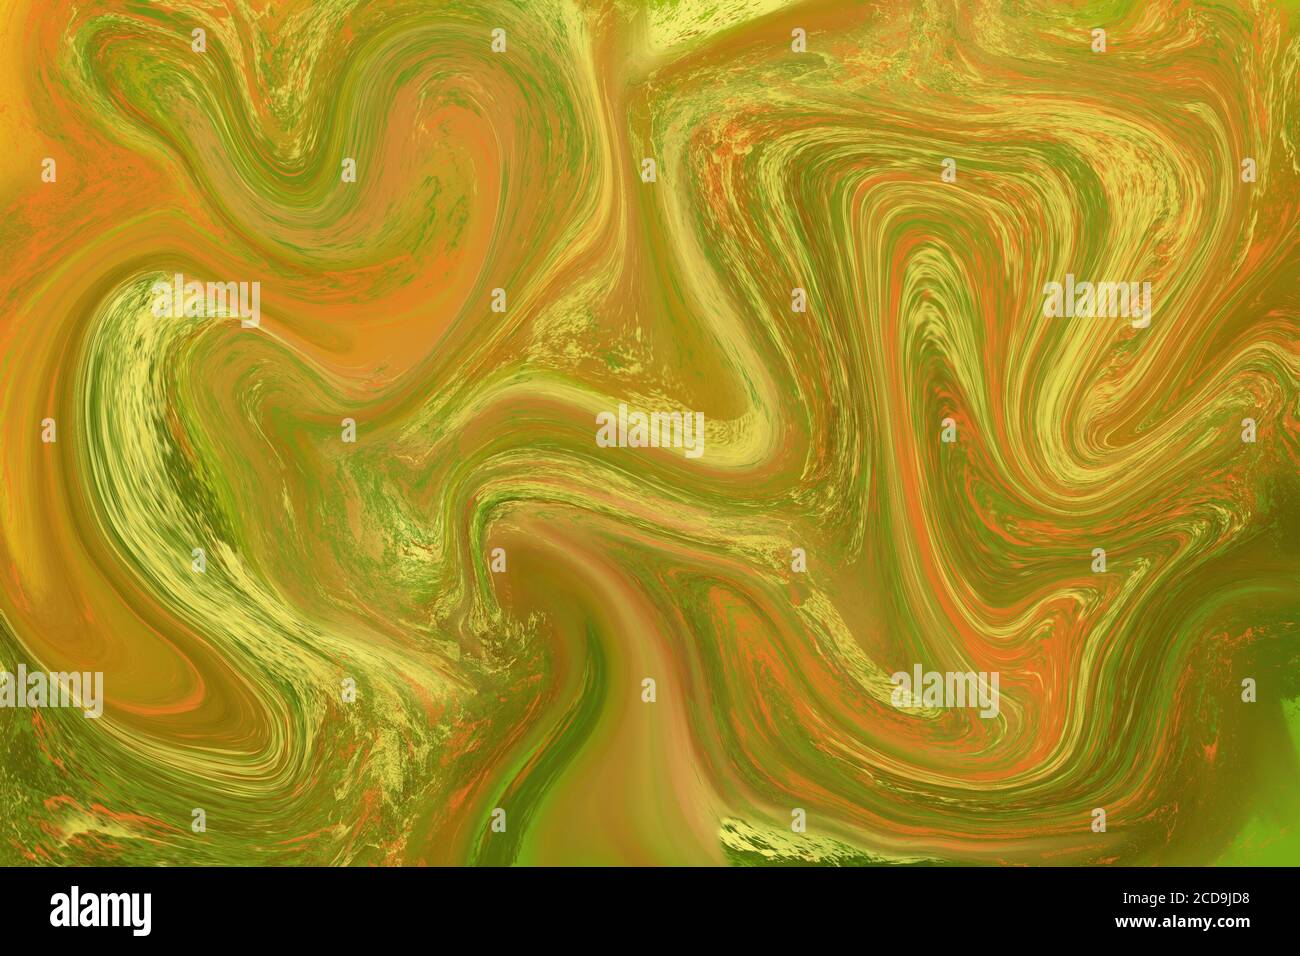 Orange green liquid paint abstraction. Marbled texture for autumn seasonal graphic design. Olive green and yellow digital illustration. Abstract float Stock Photo